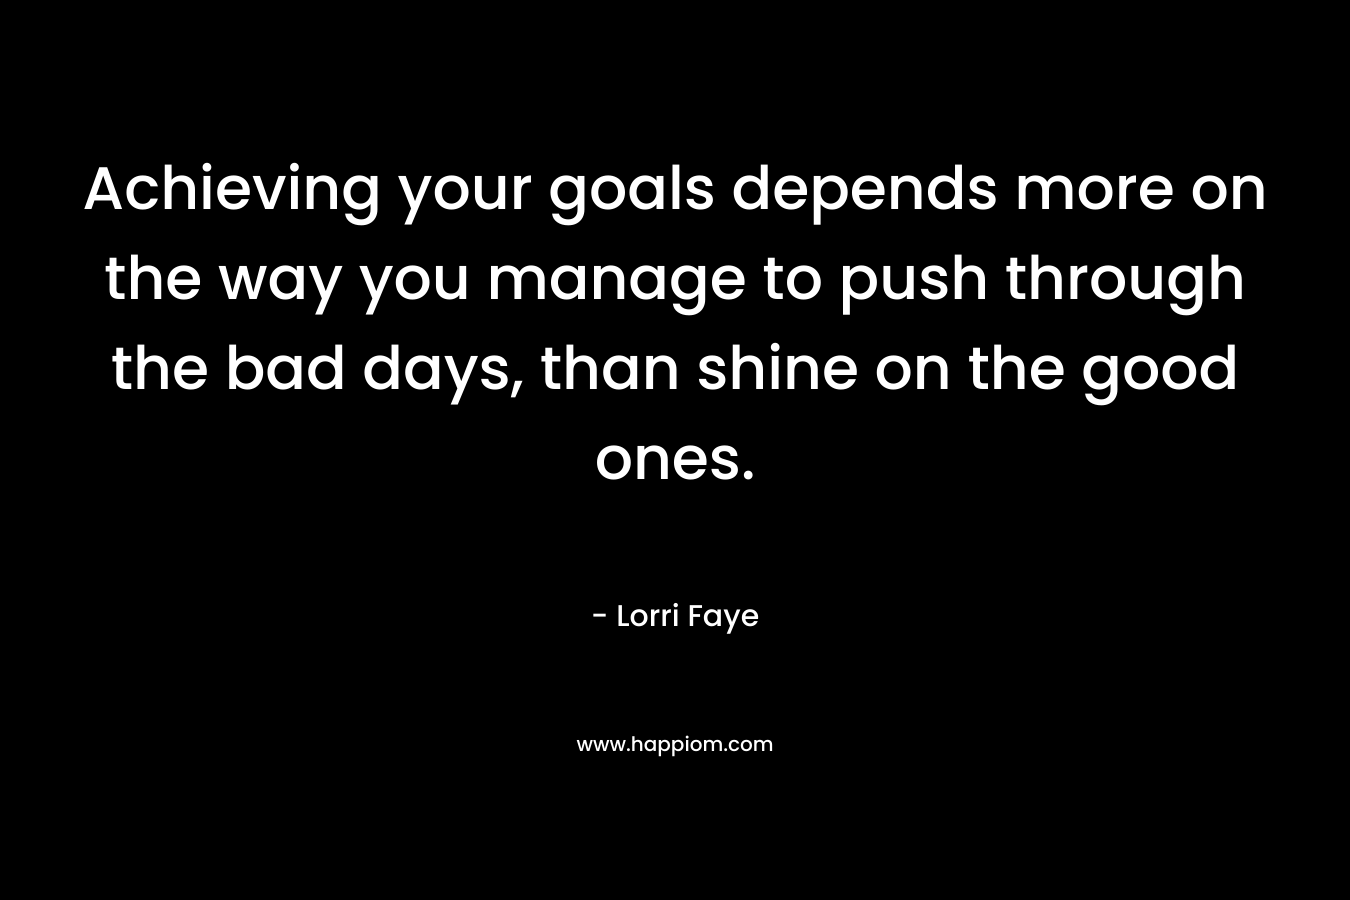 Achieving your goals depends more on the way you manage to push through the bad days, than shine on the good ones. – Lorri Faye